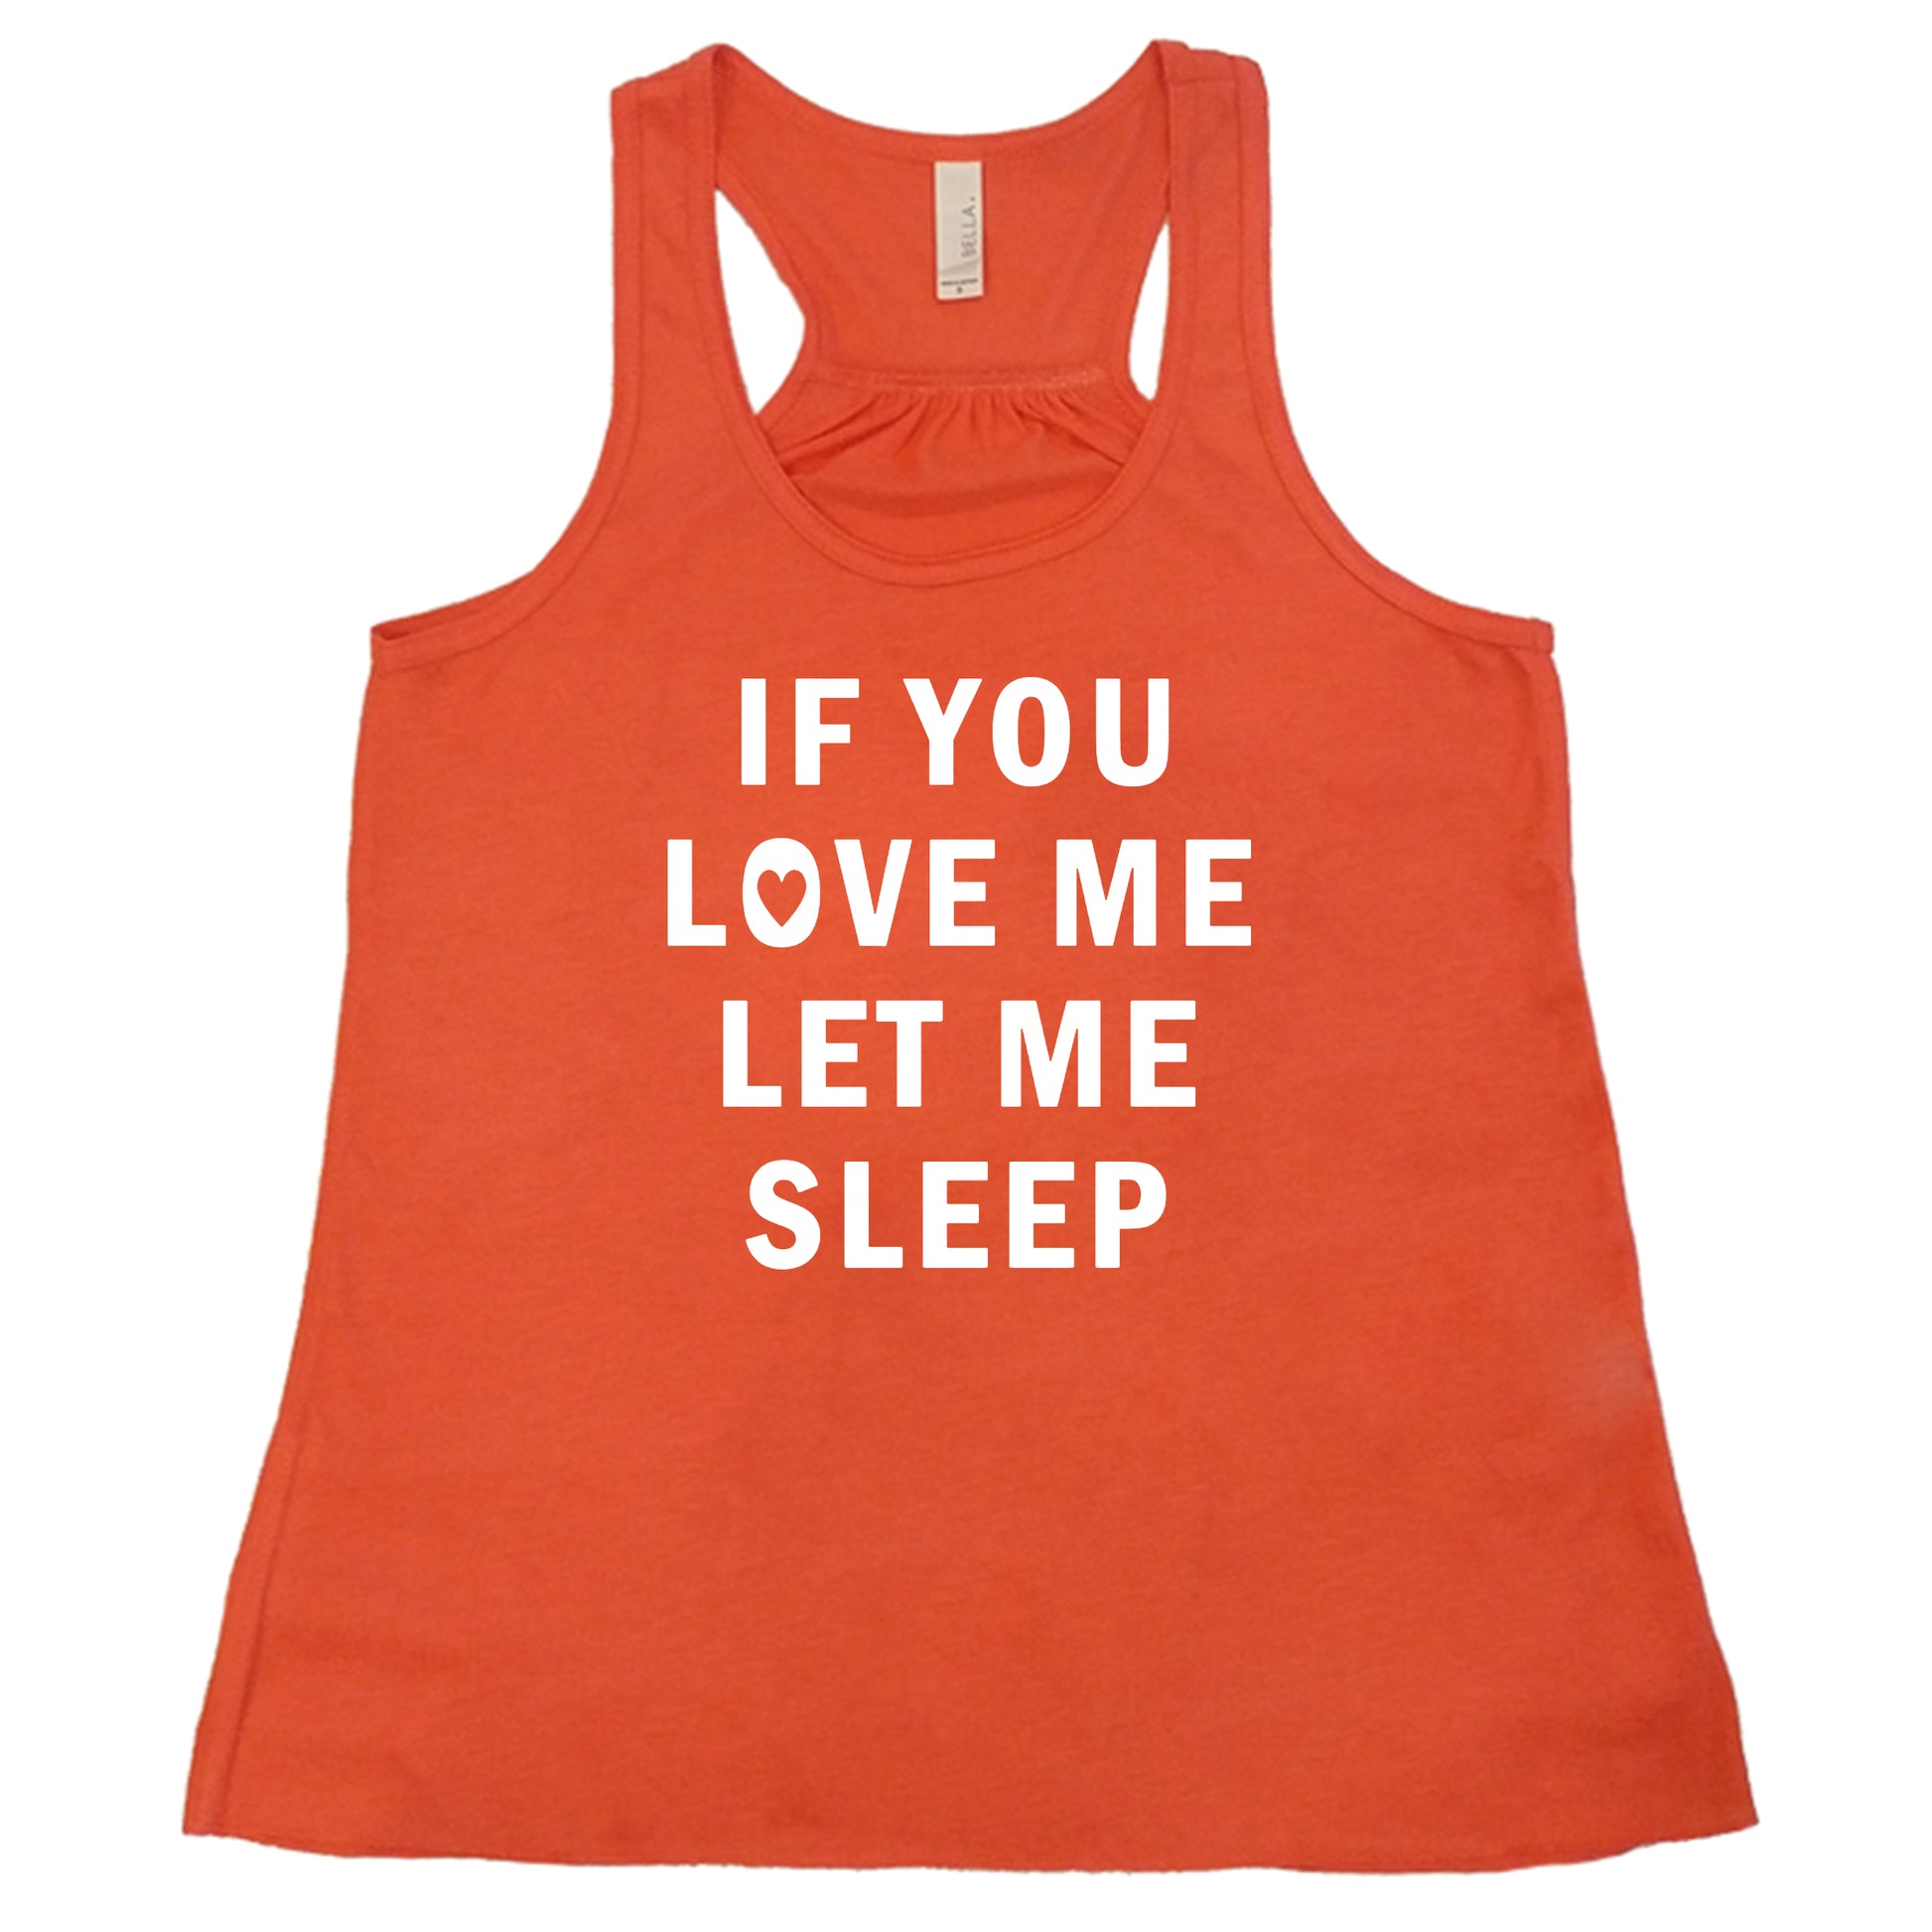 orange tank top with the saying "if you love me let me sleep"